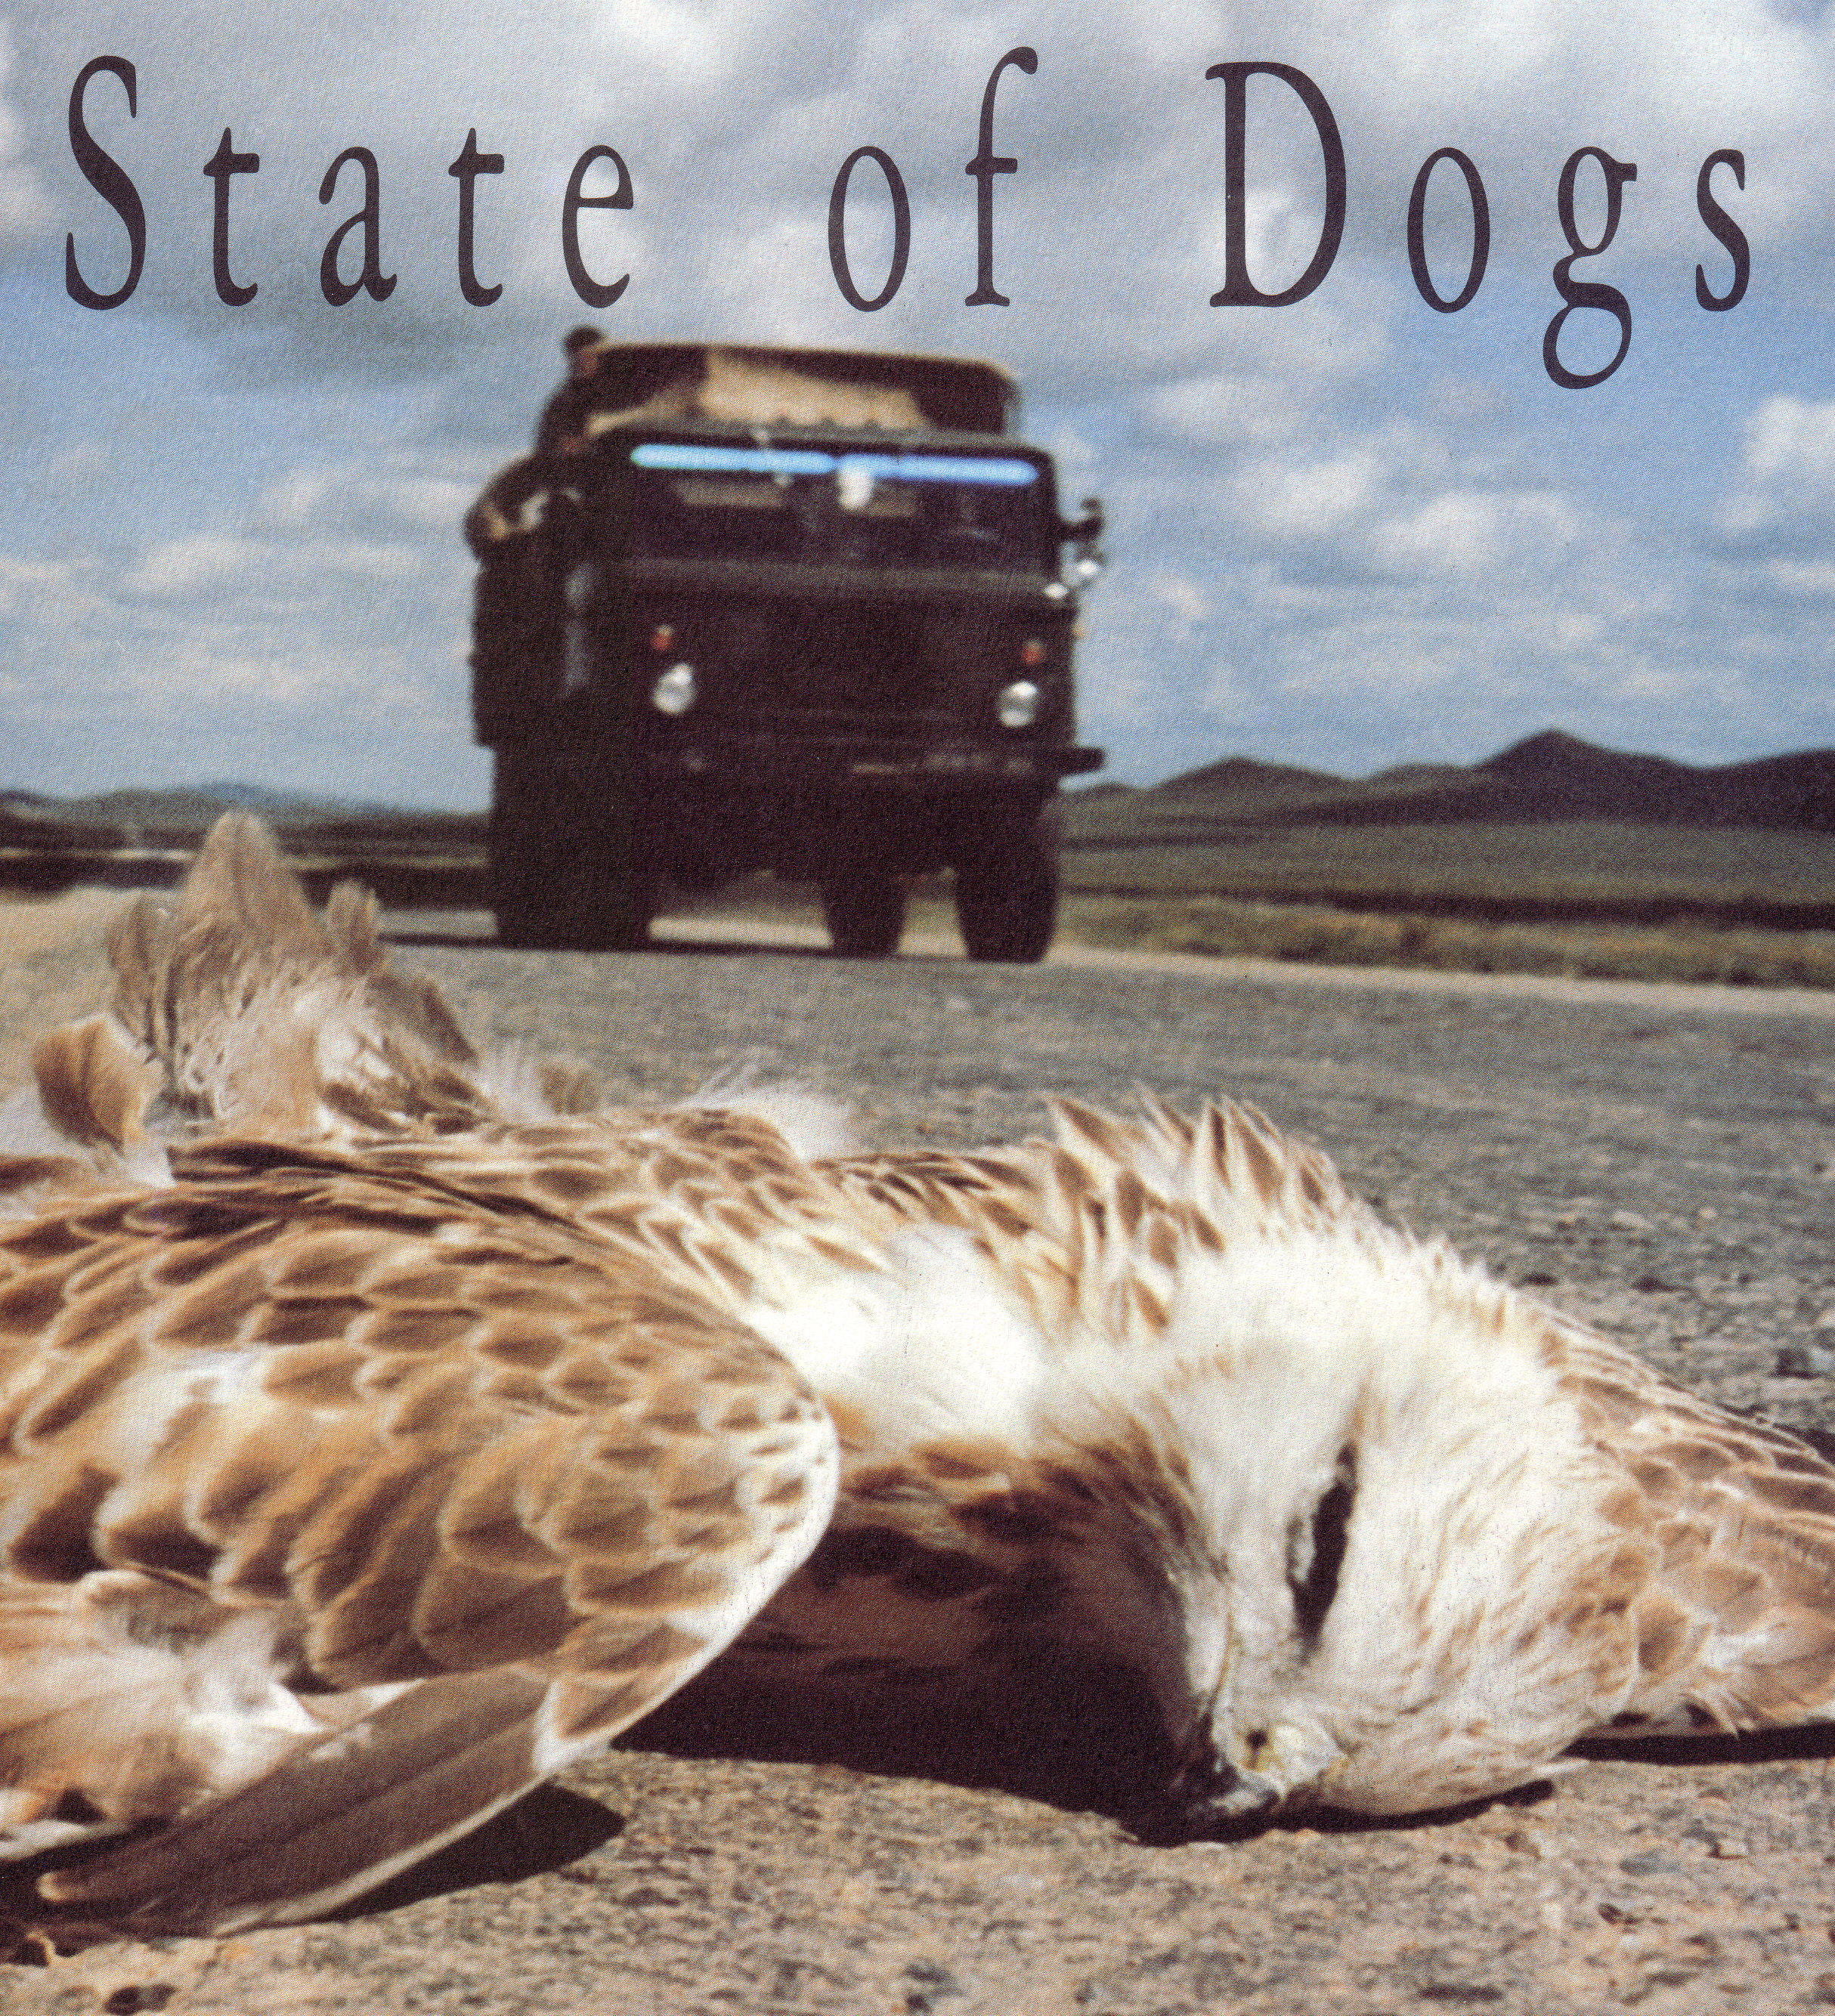 State of Dogs (1998) Screenshot 4